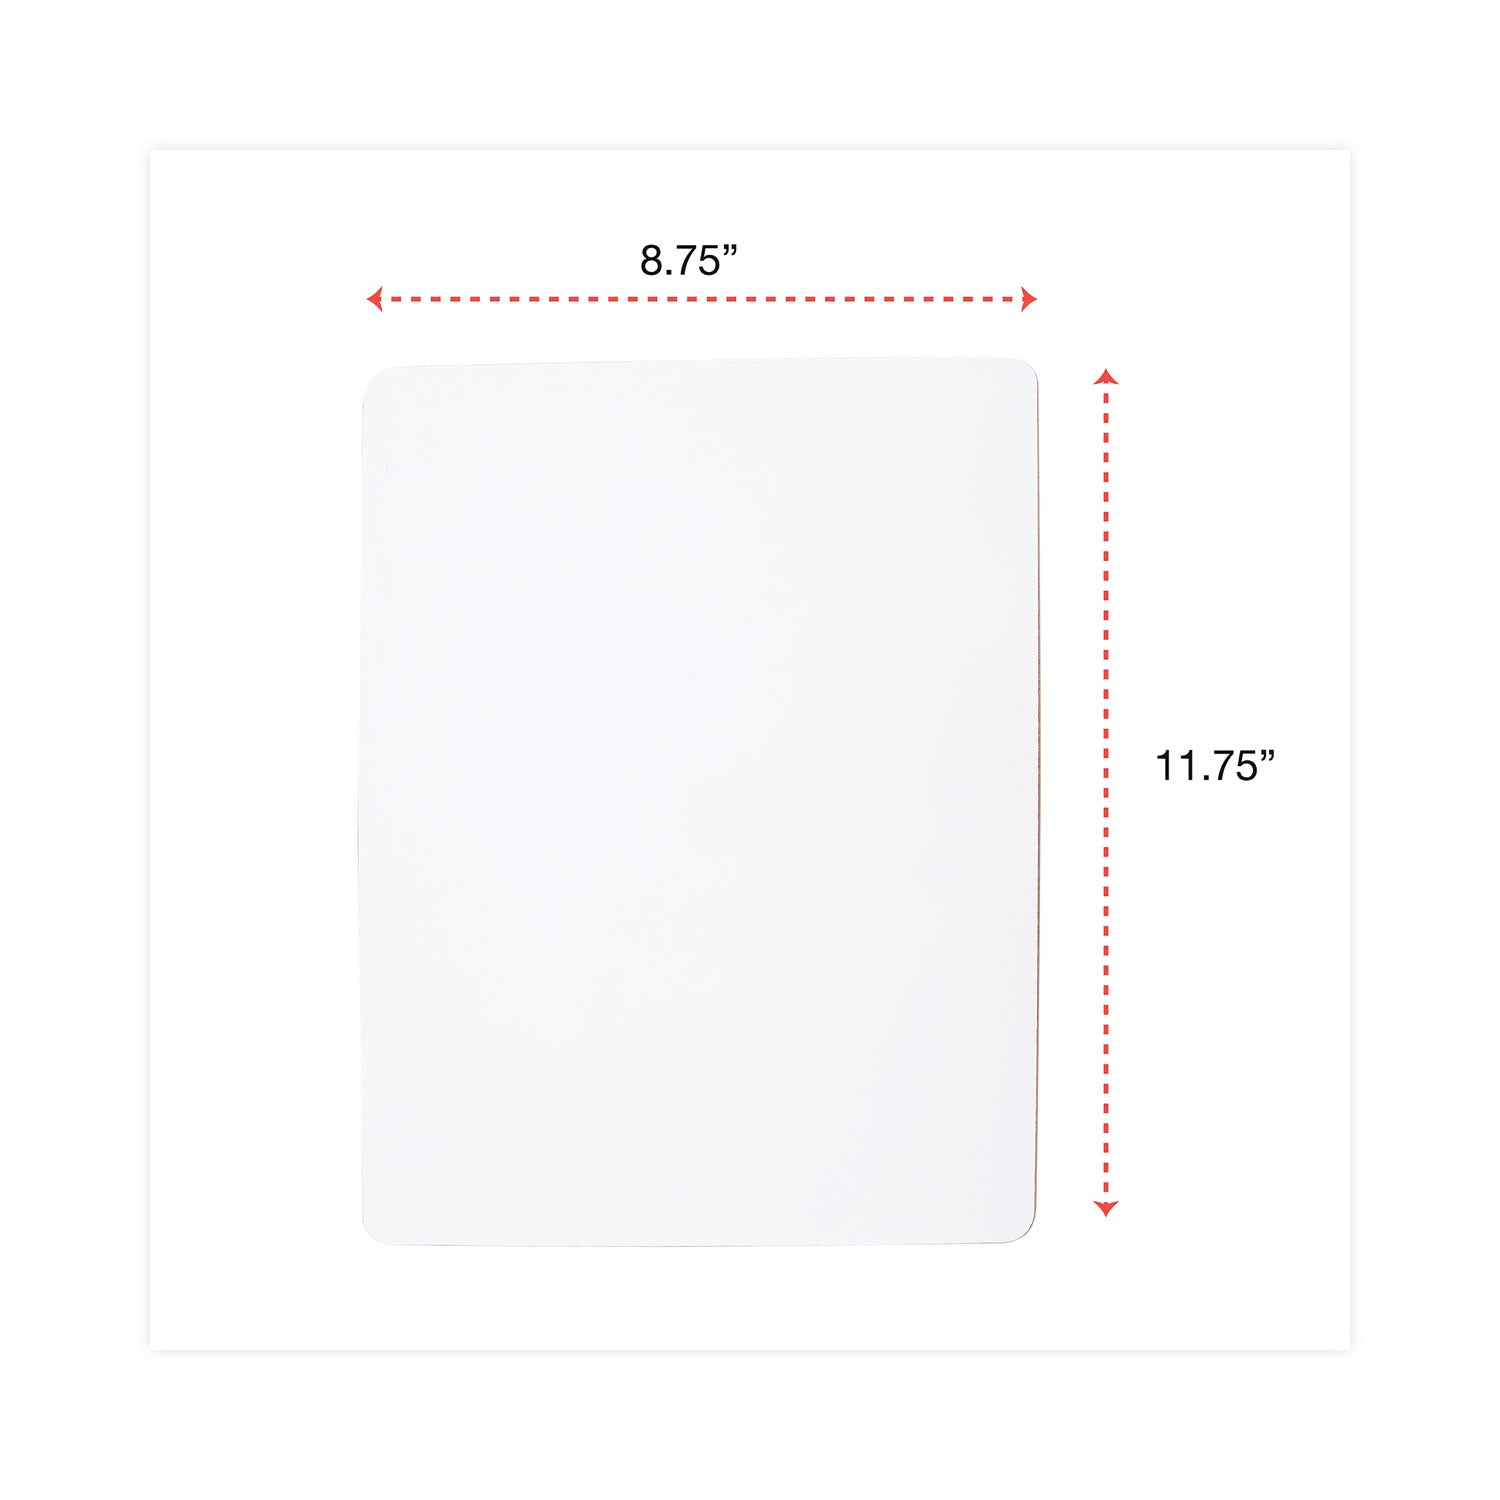 lap-learning-dry-erase-board-unruled-1175-x-875-white-surface-6-pack_unv43910 - 3